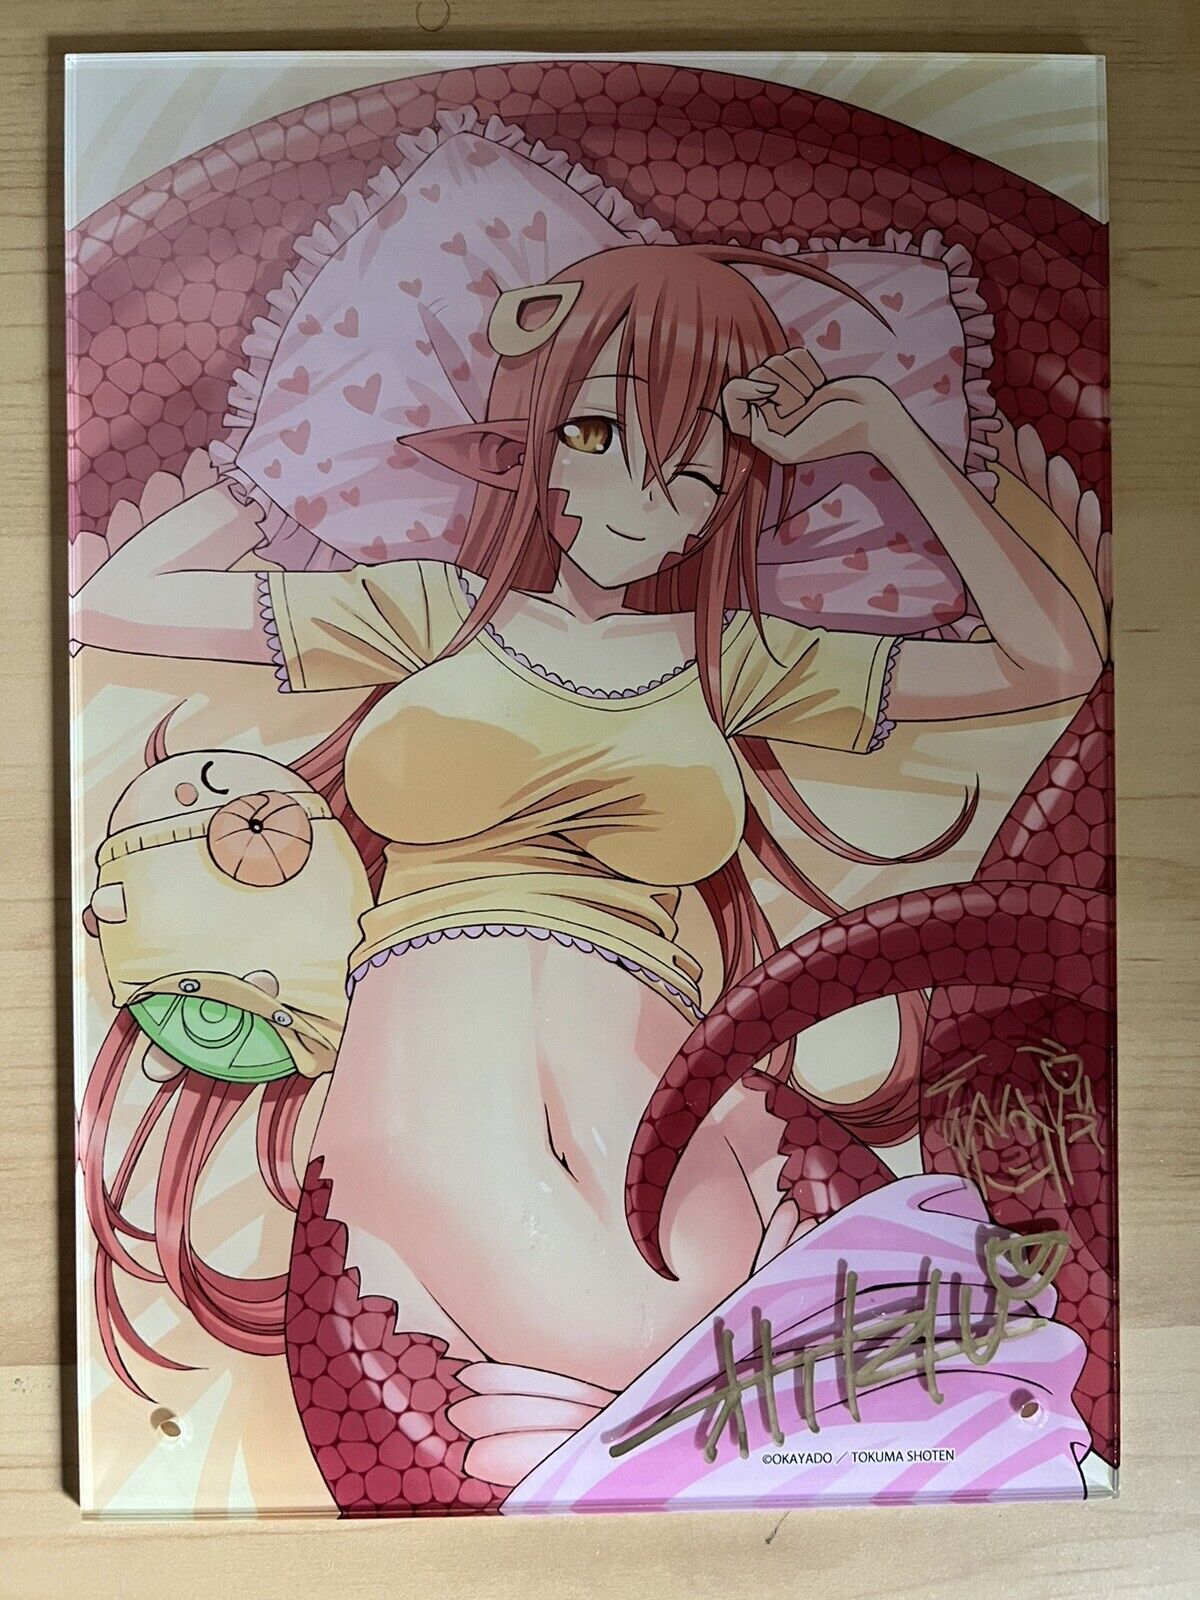 Monster Musume OKAYADO Signed Everyday Life with Monster Autographed Acrylic